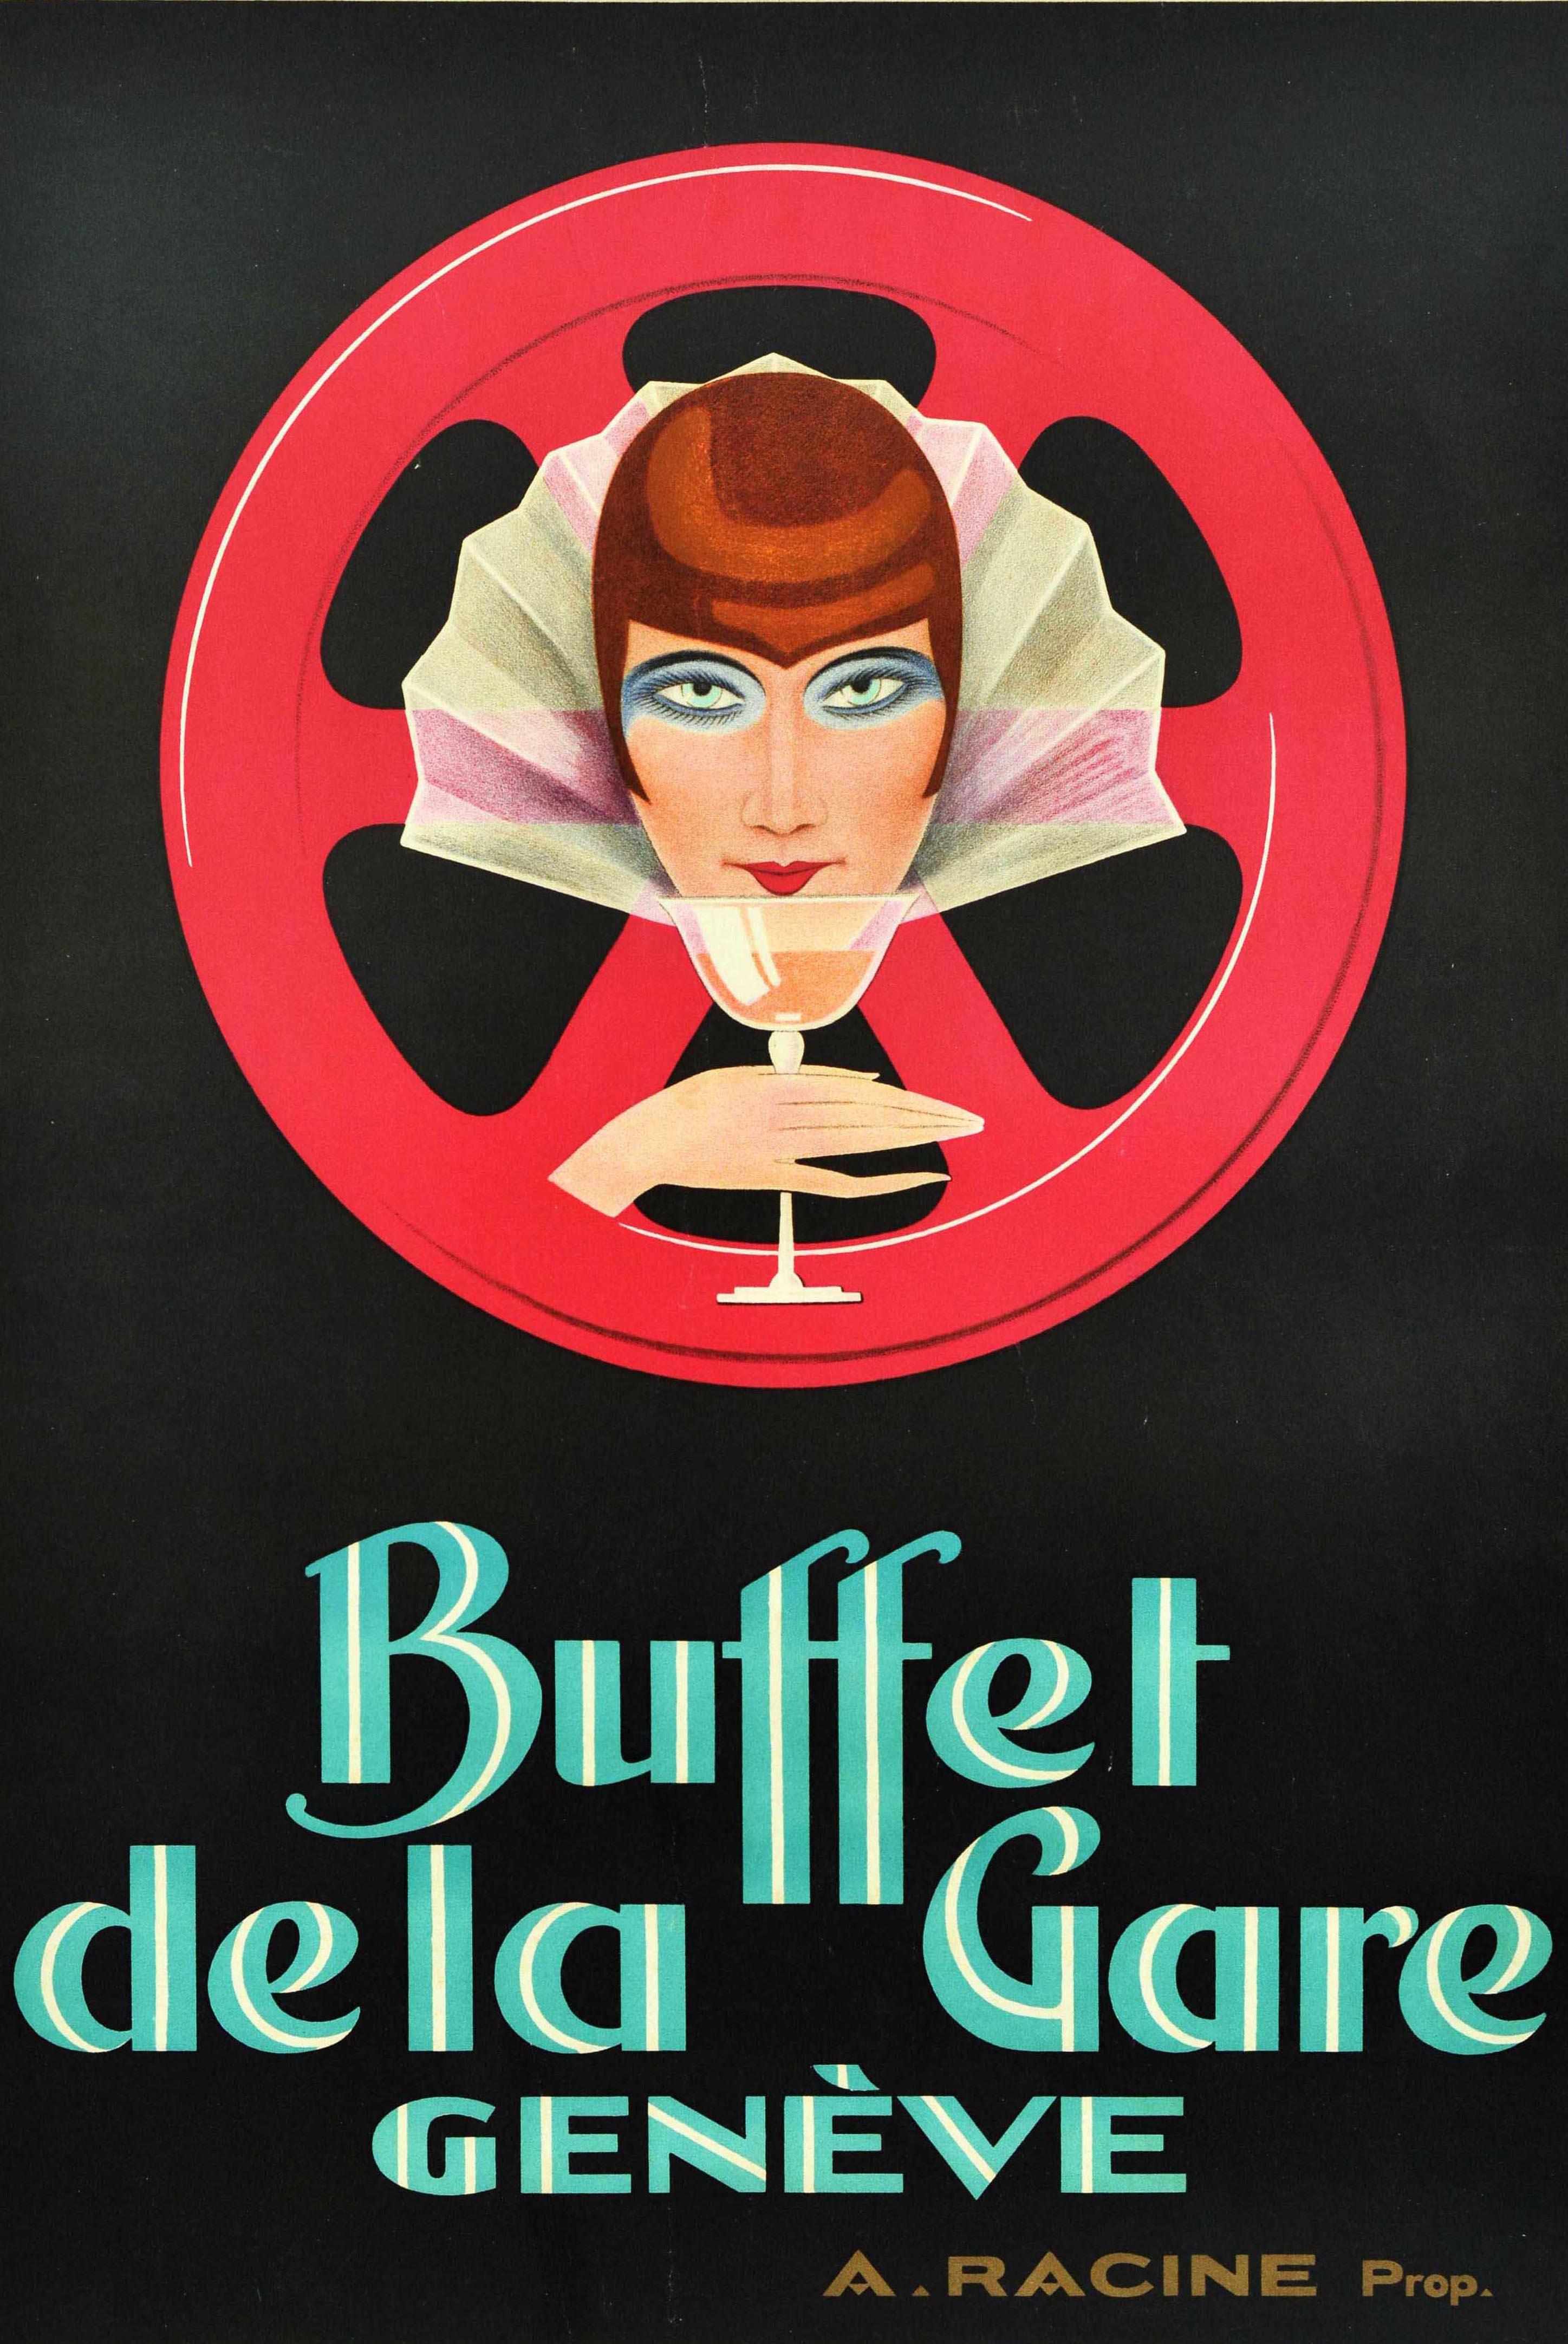 Original antique advertising poster for the Buffet De La Gare Geneve / Station Buffet Geneva featuring a stunning Art Deco image of a lady looking to the viewer, holding a glass to drink against a red wheel on the black background, the bold stylised